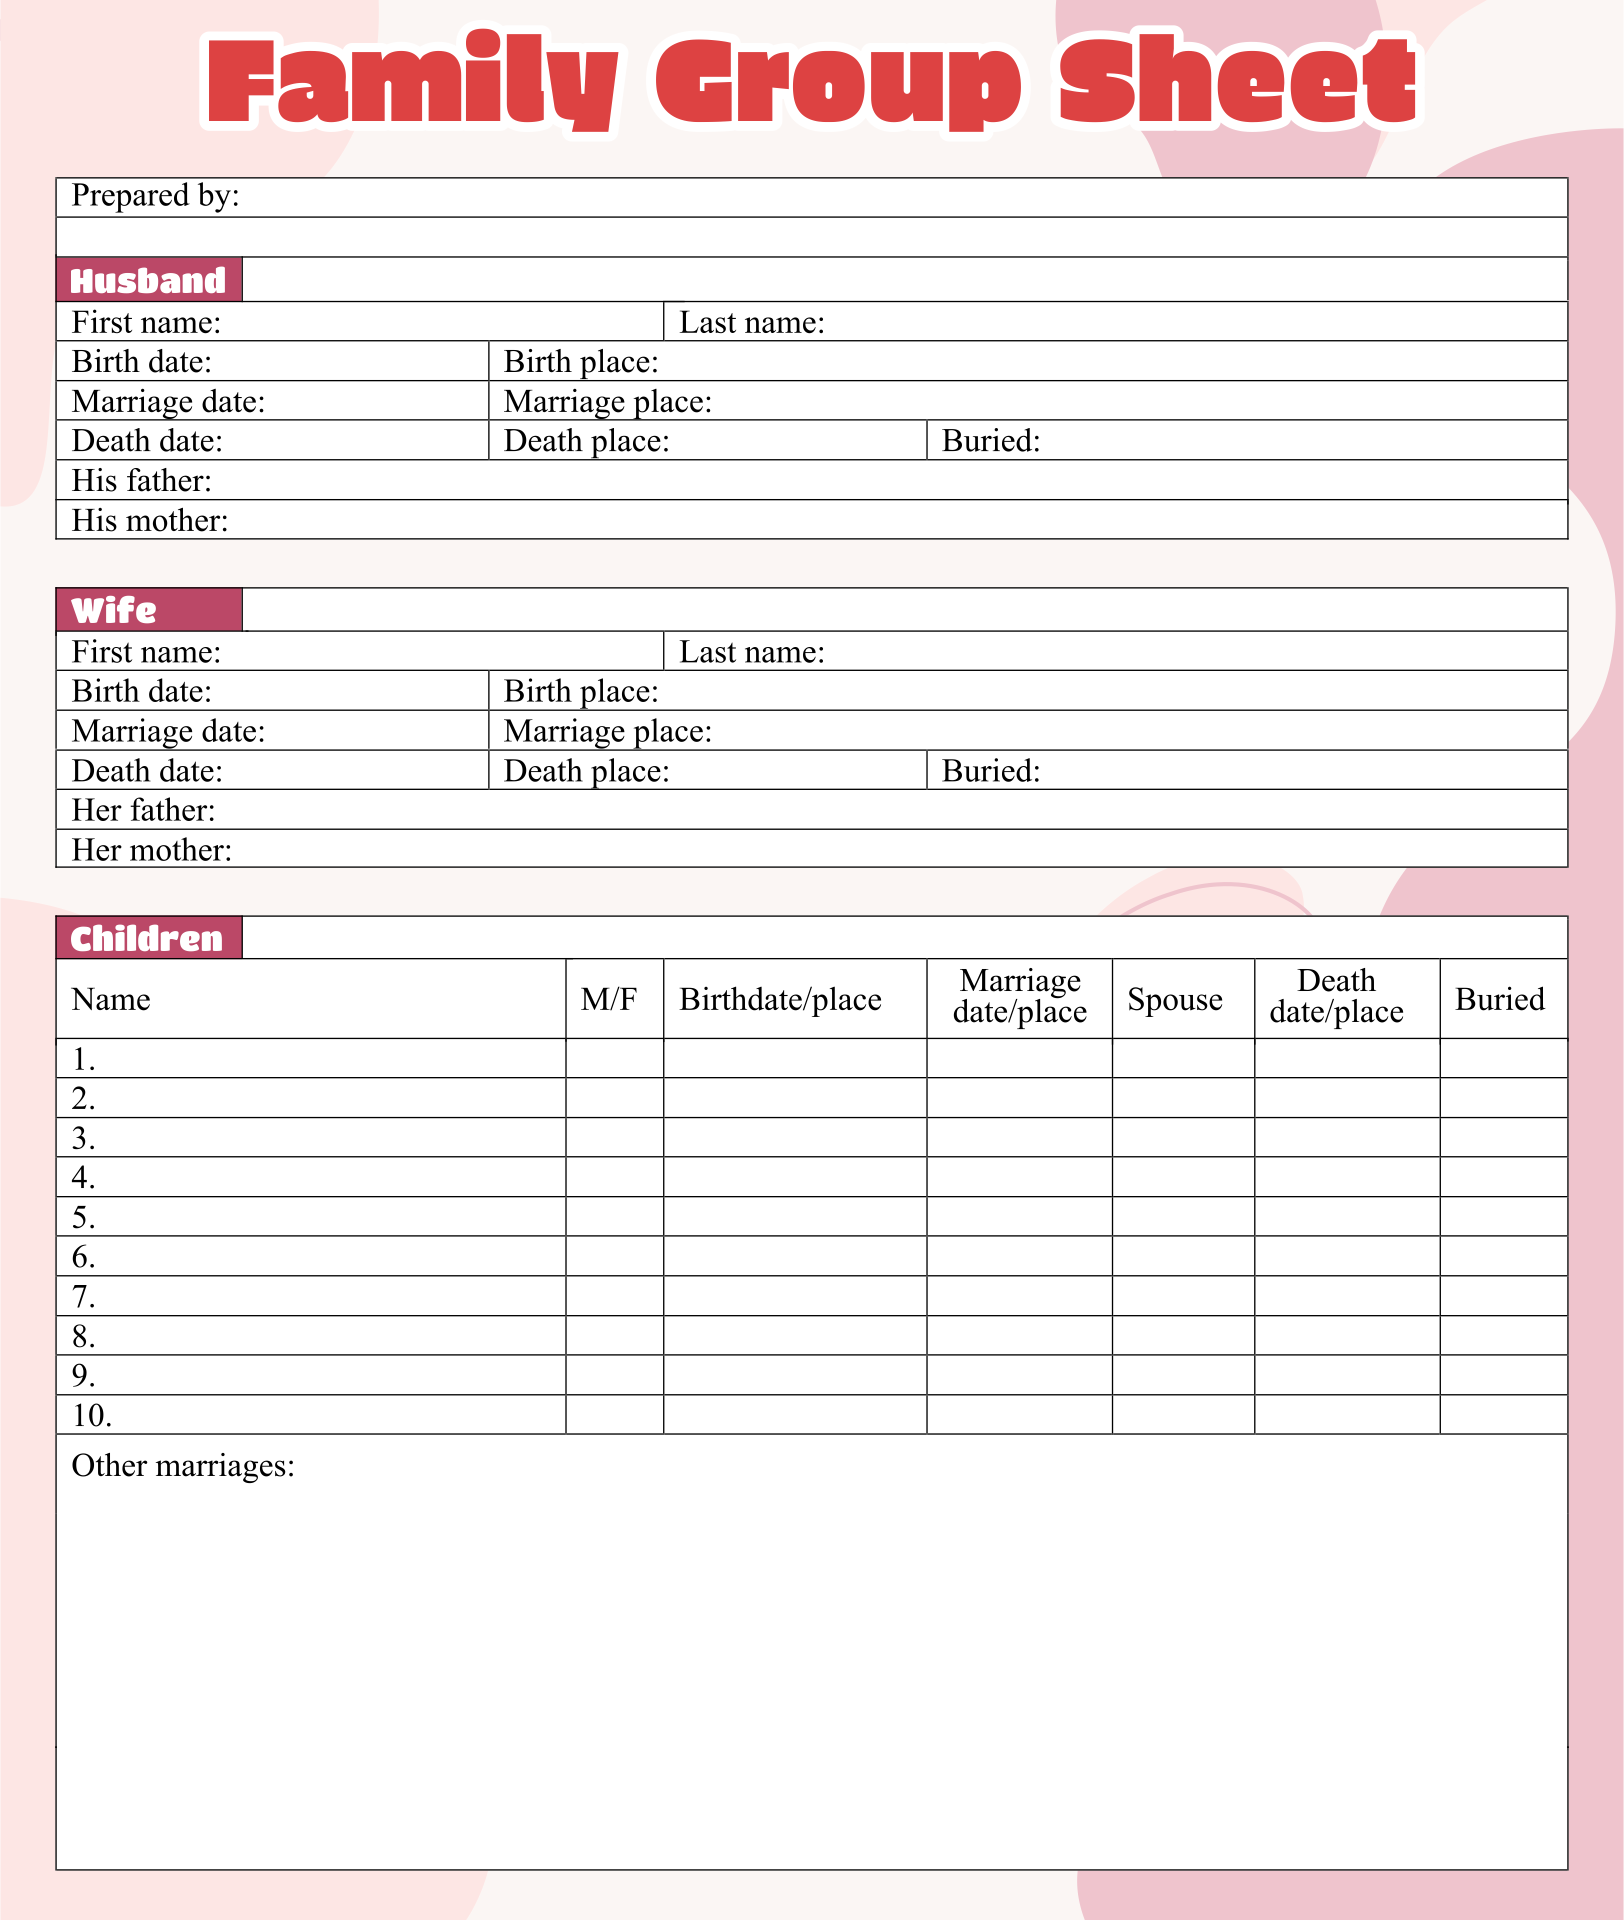 LDS Family Group Sheet Template